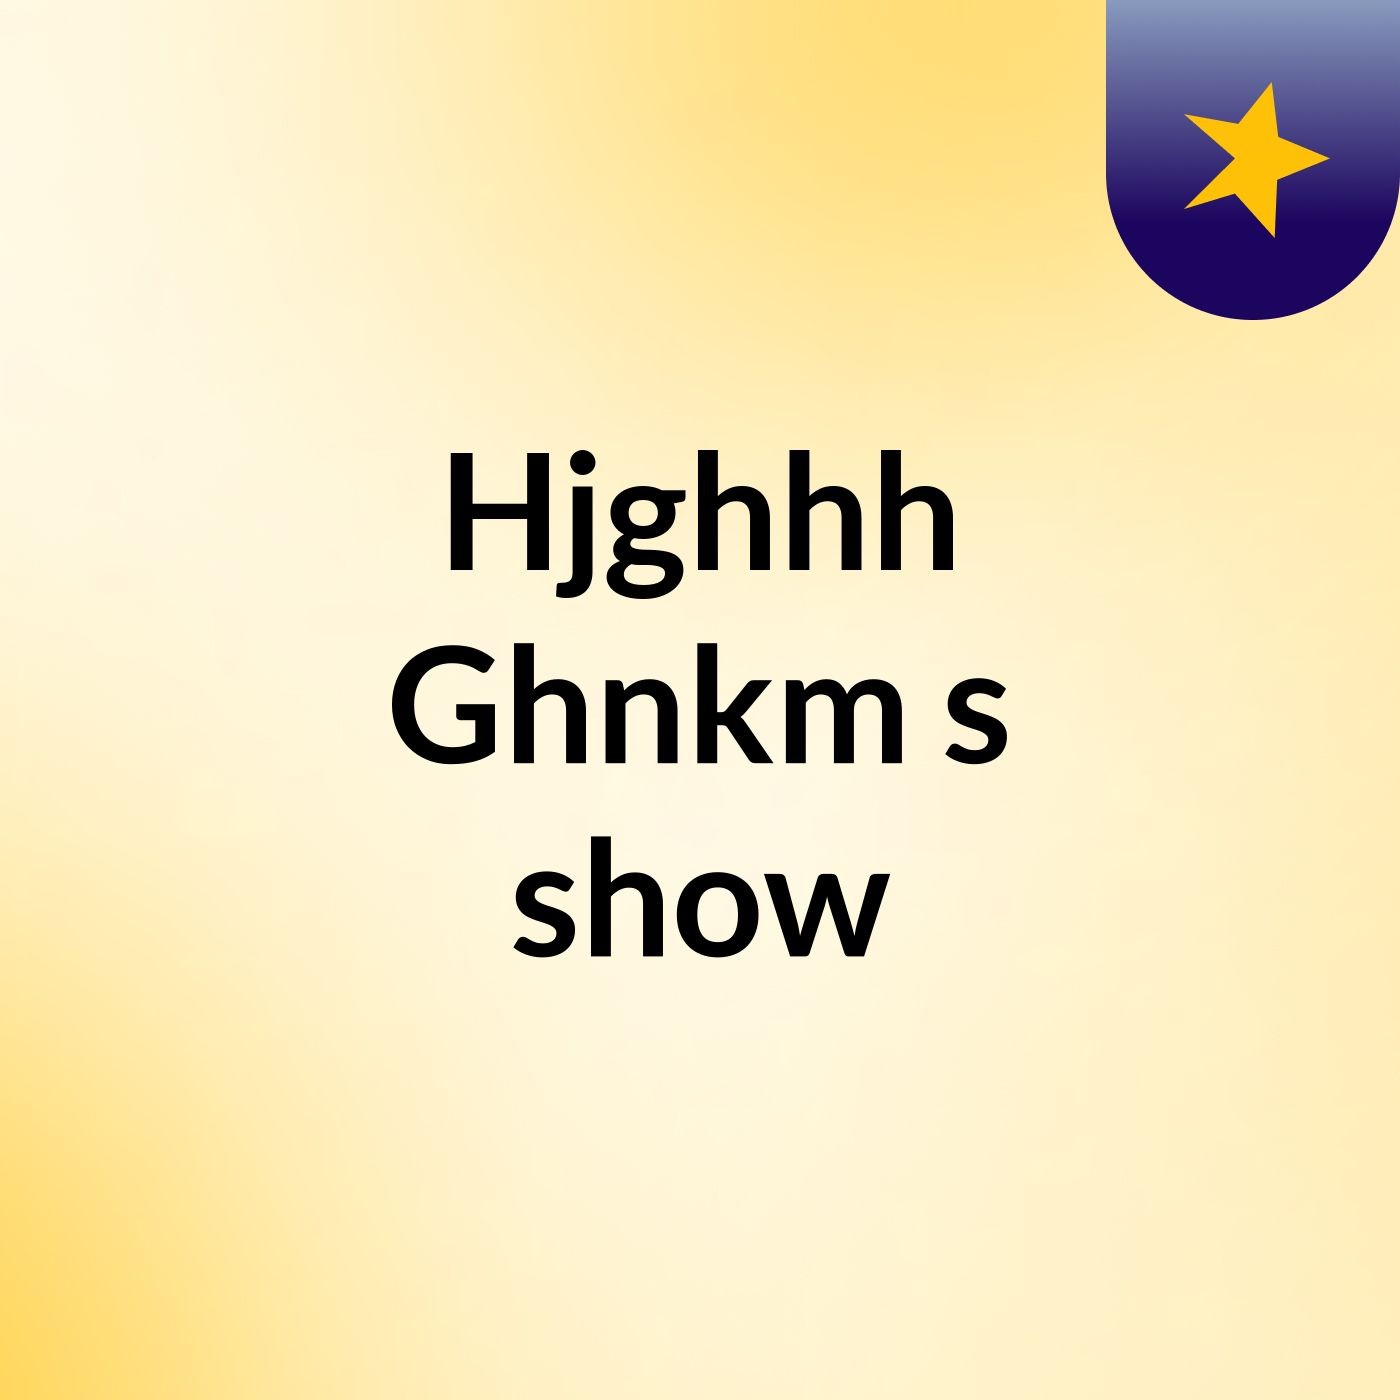 Hjghhh Ghnkm's show